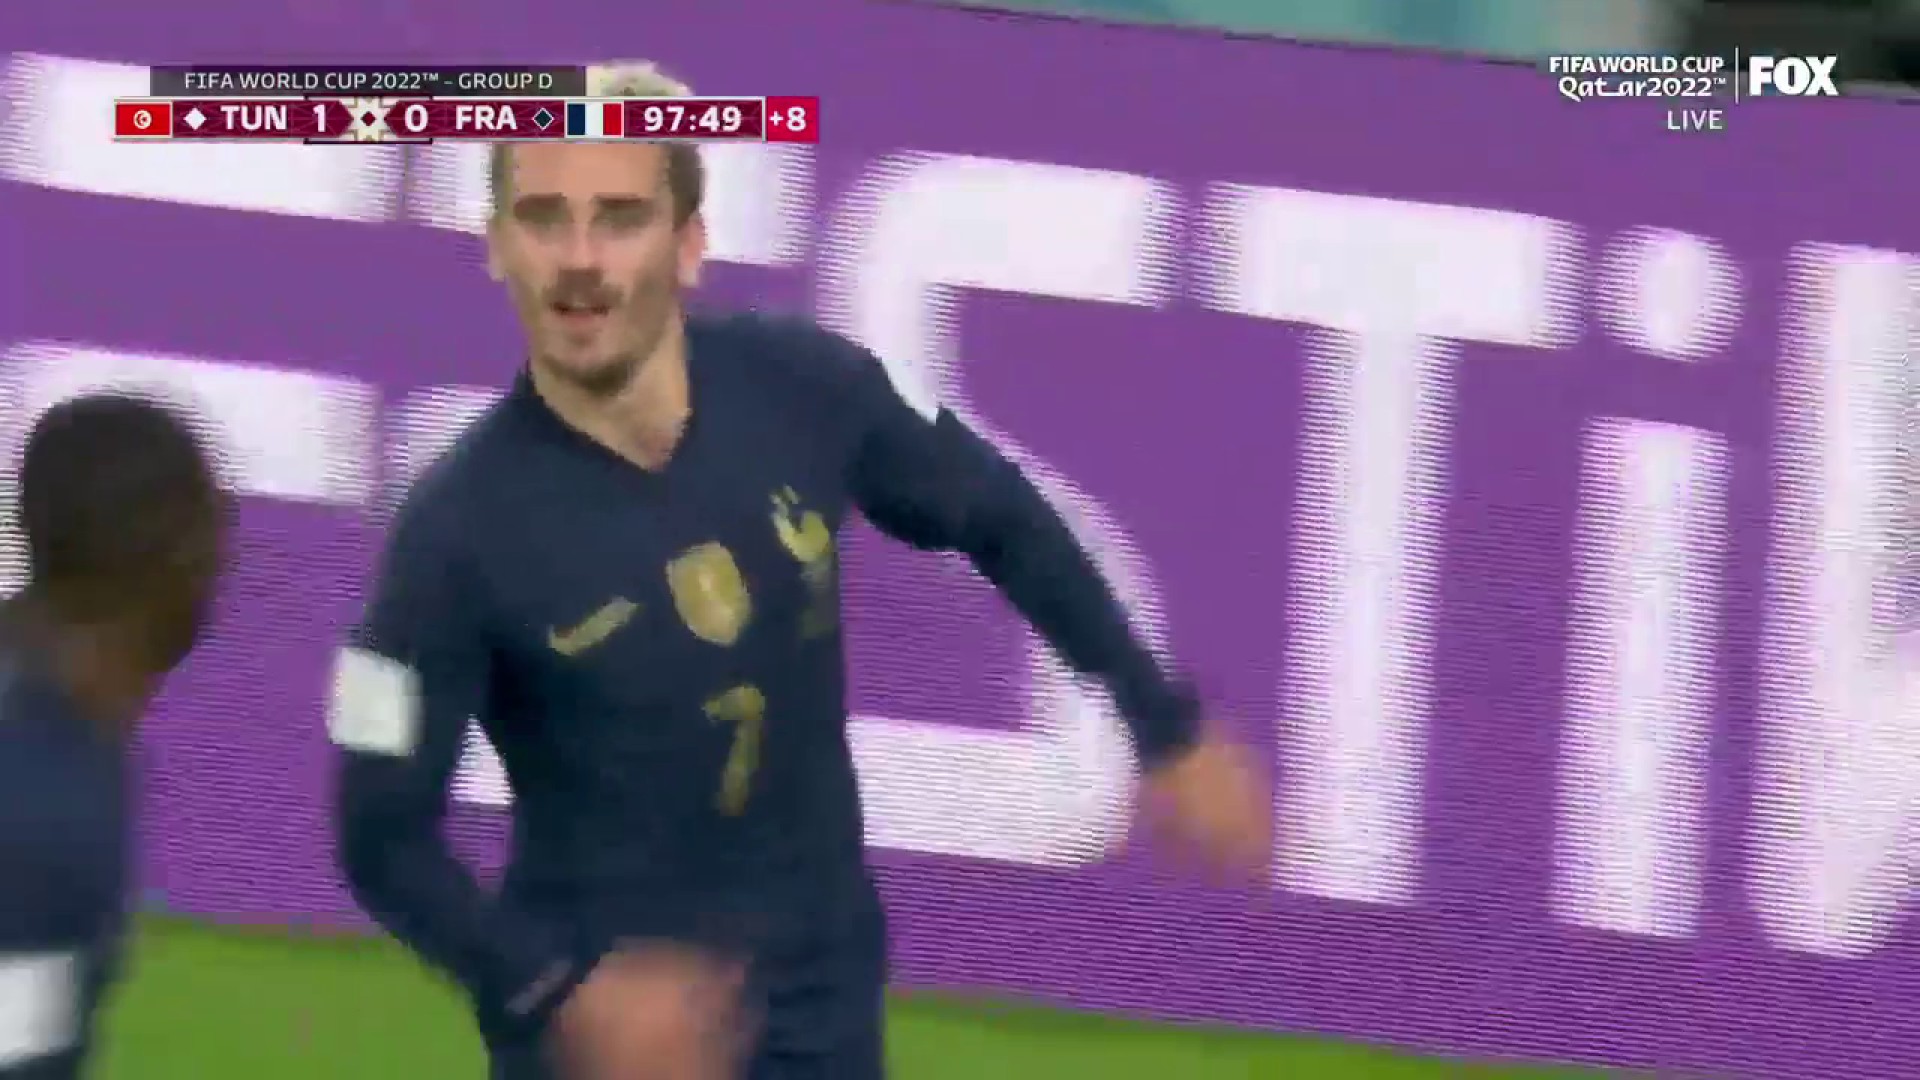 After a VAR check, Griezmann's goal does not stand for France”